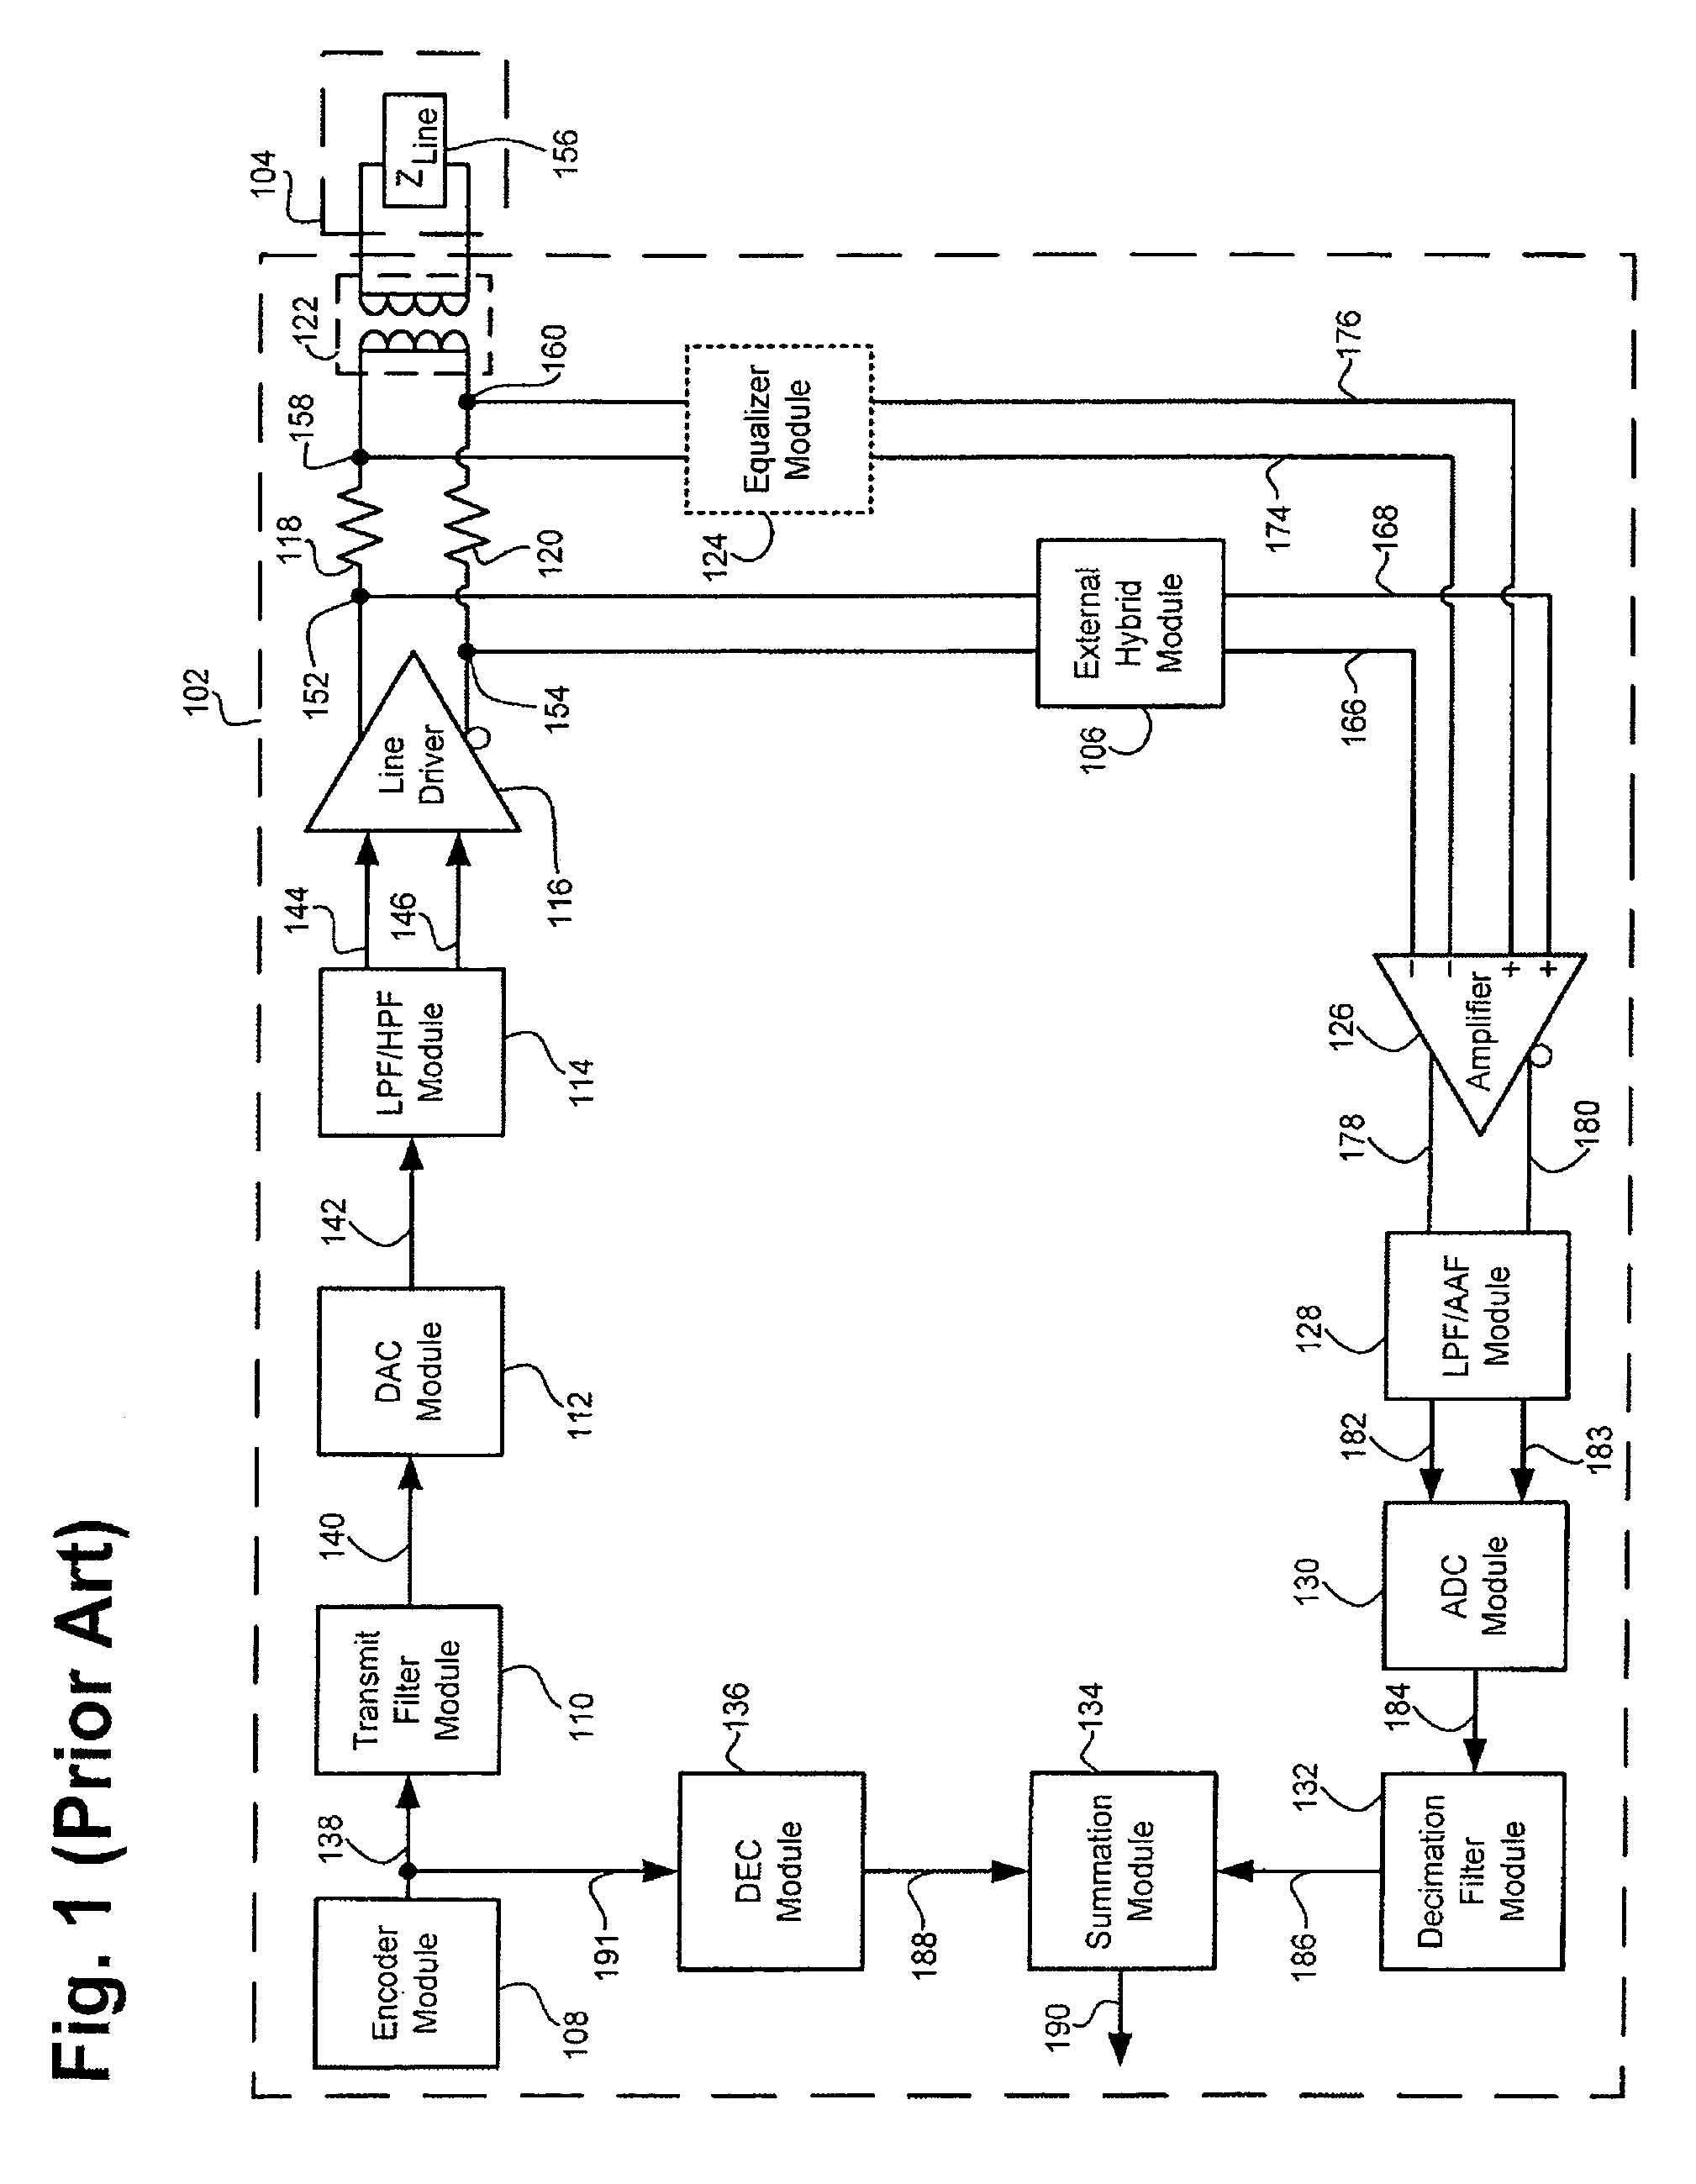 Echo cancellation in a communication device